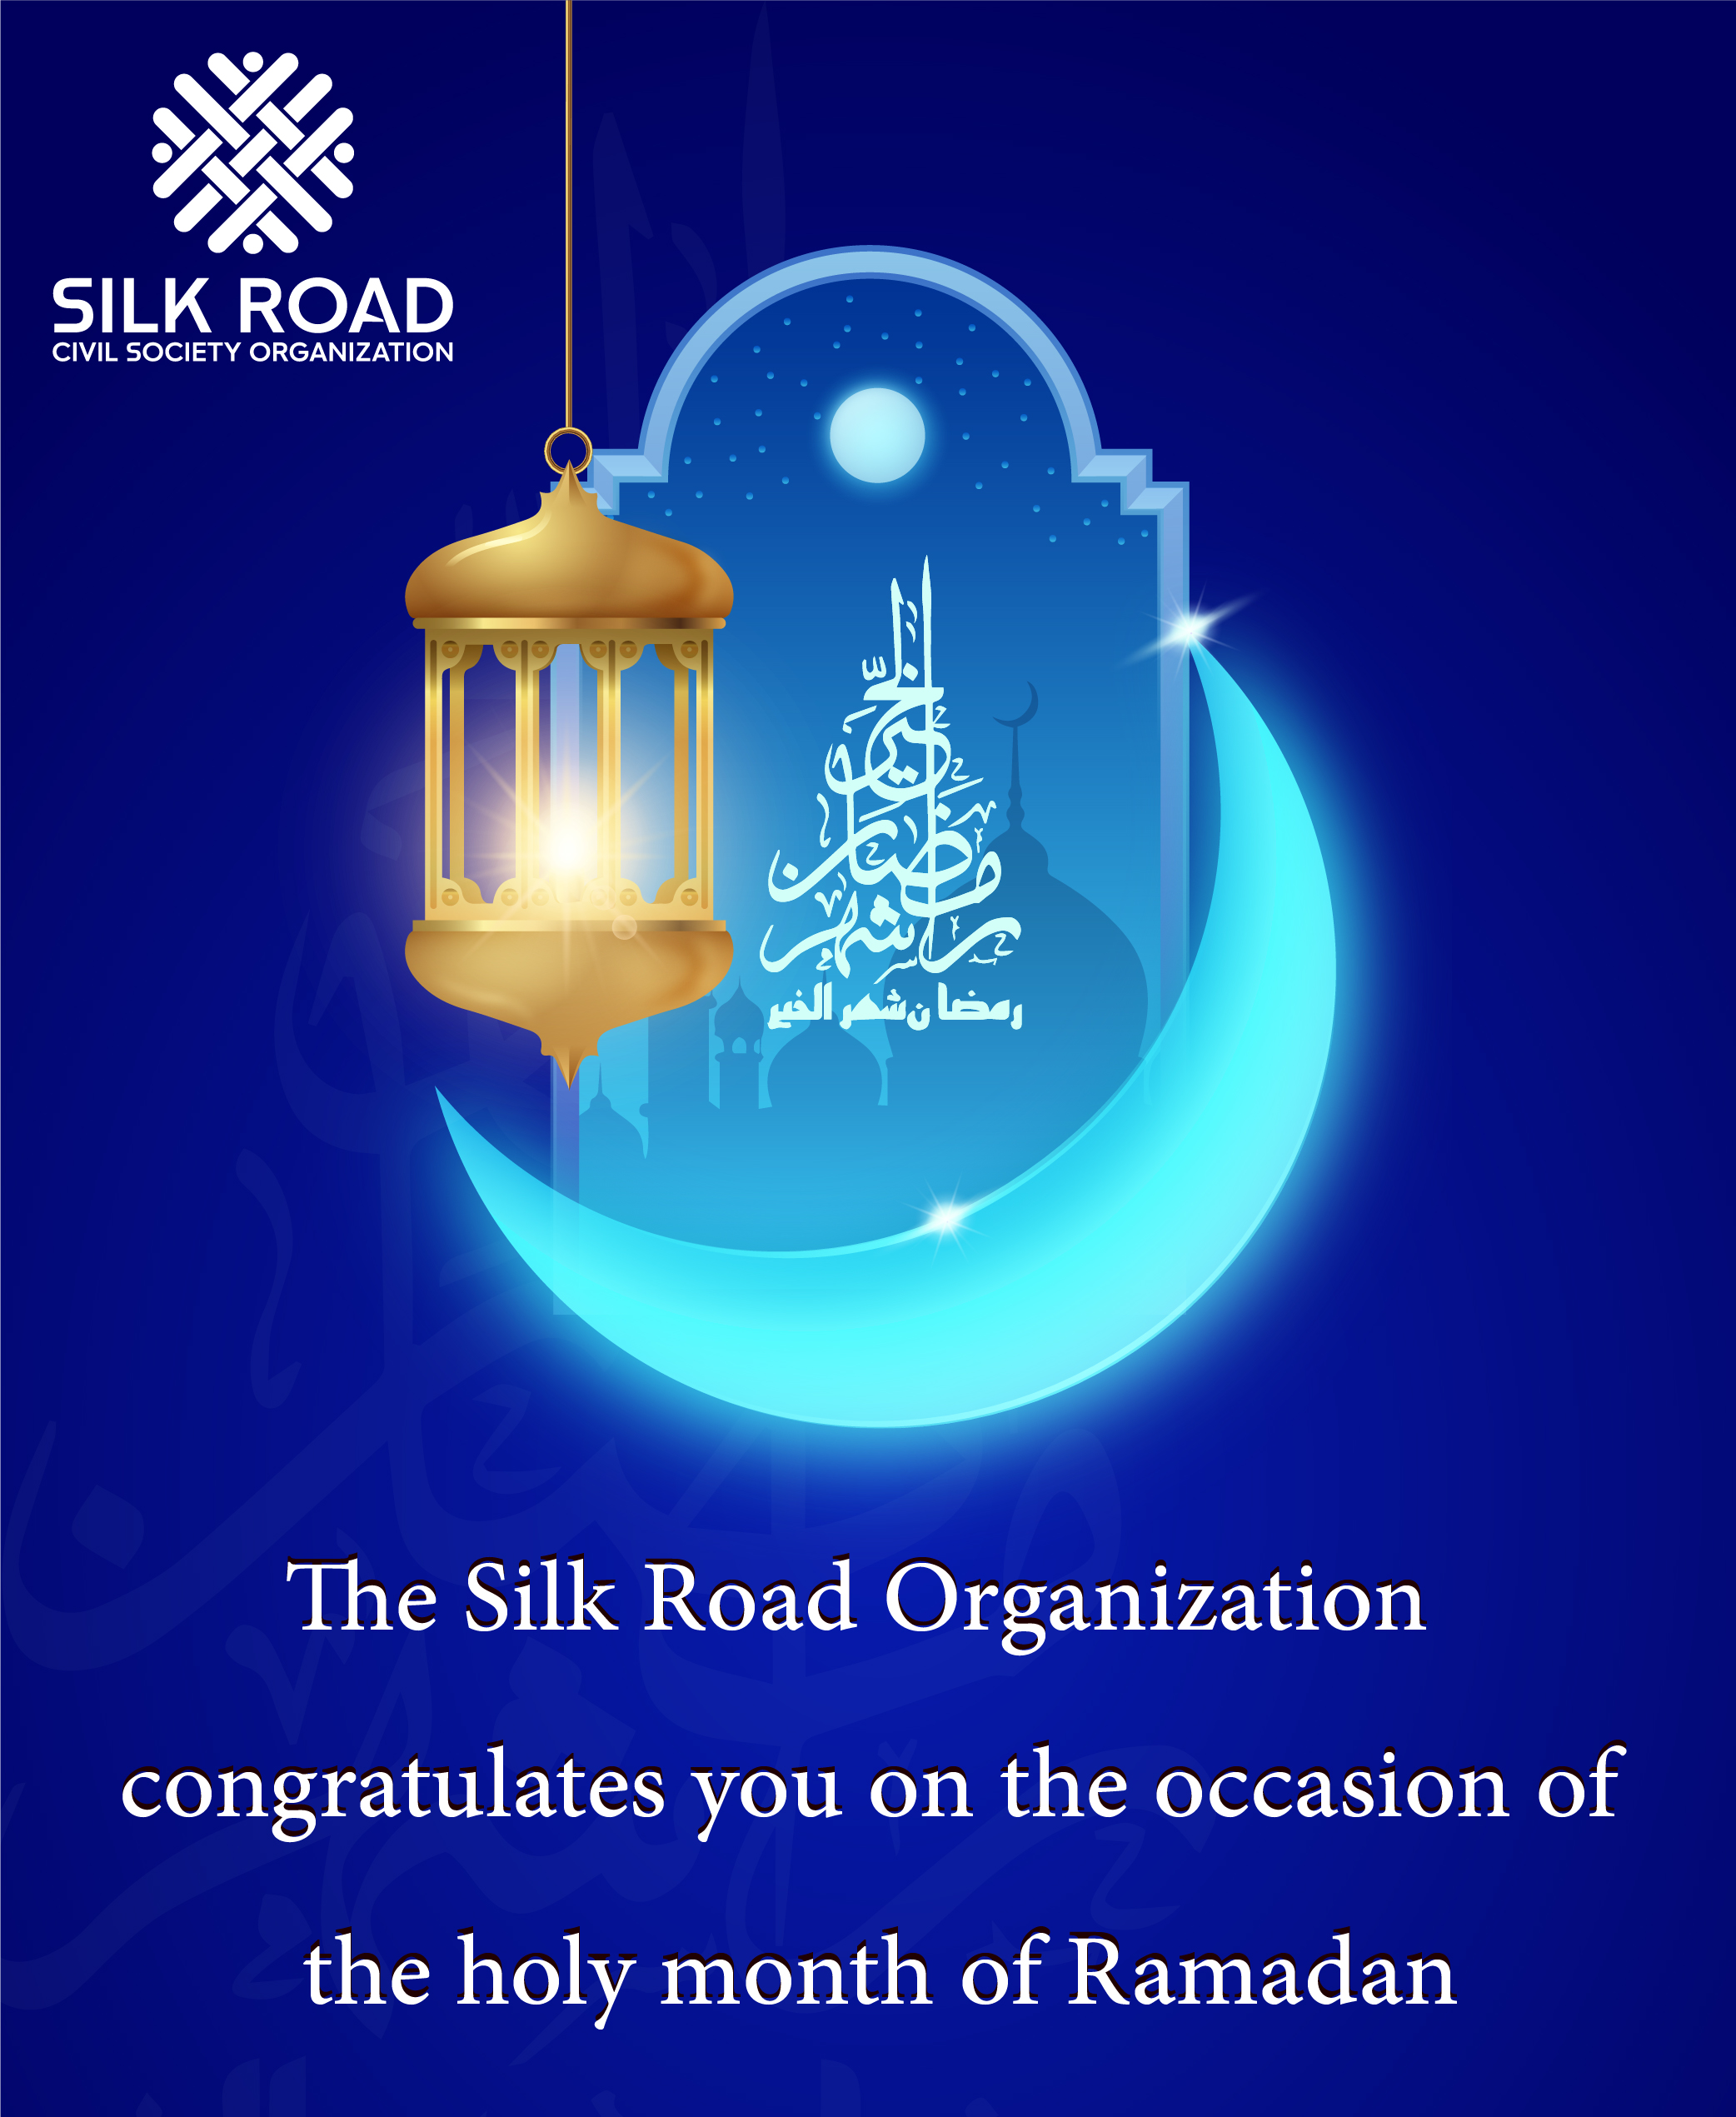 The Silk Road Organization congratulates you on the occasion of the holy month of Ramadan